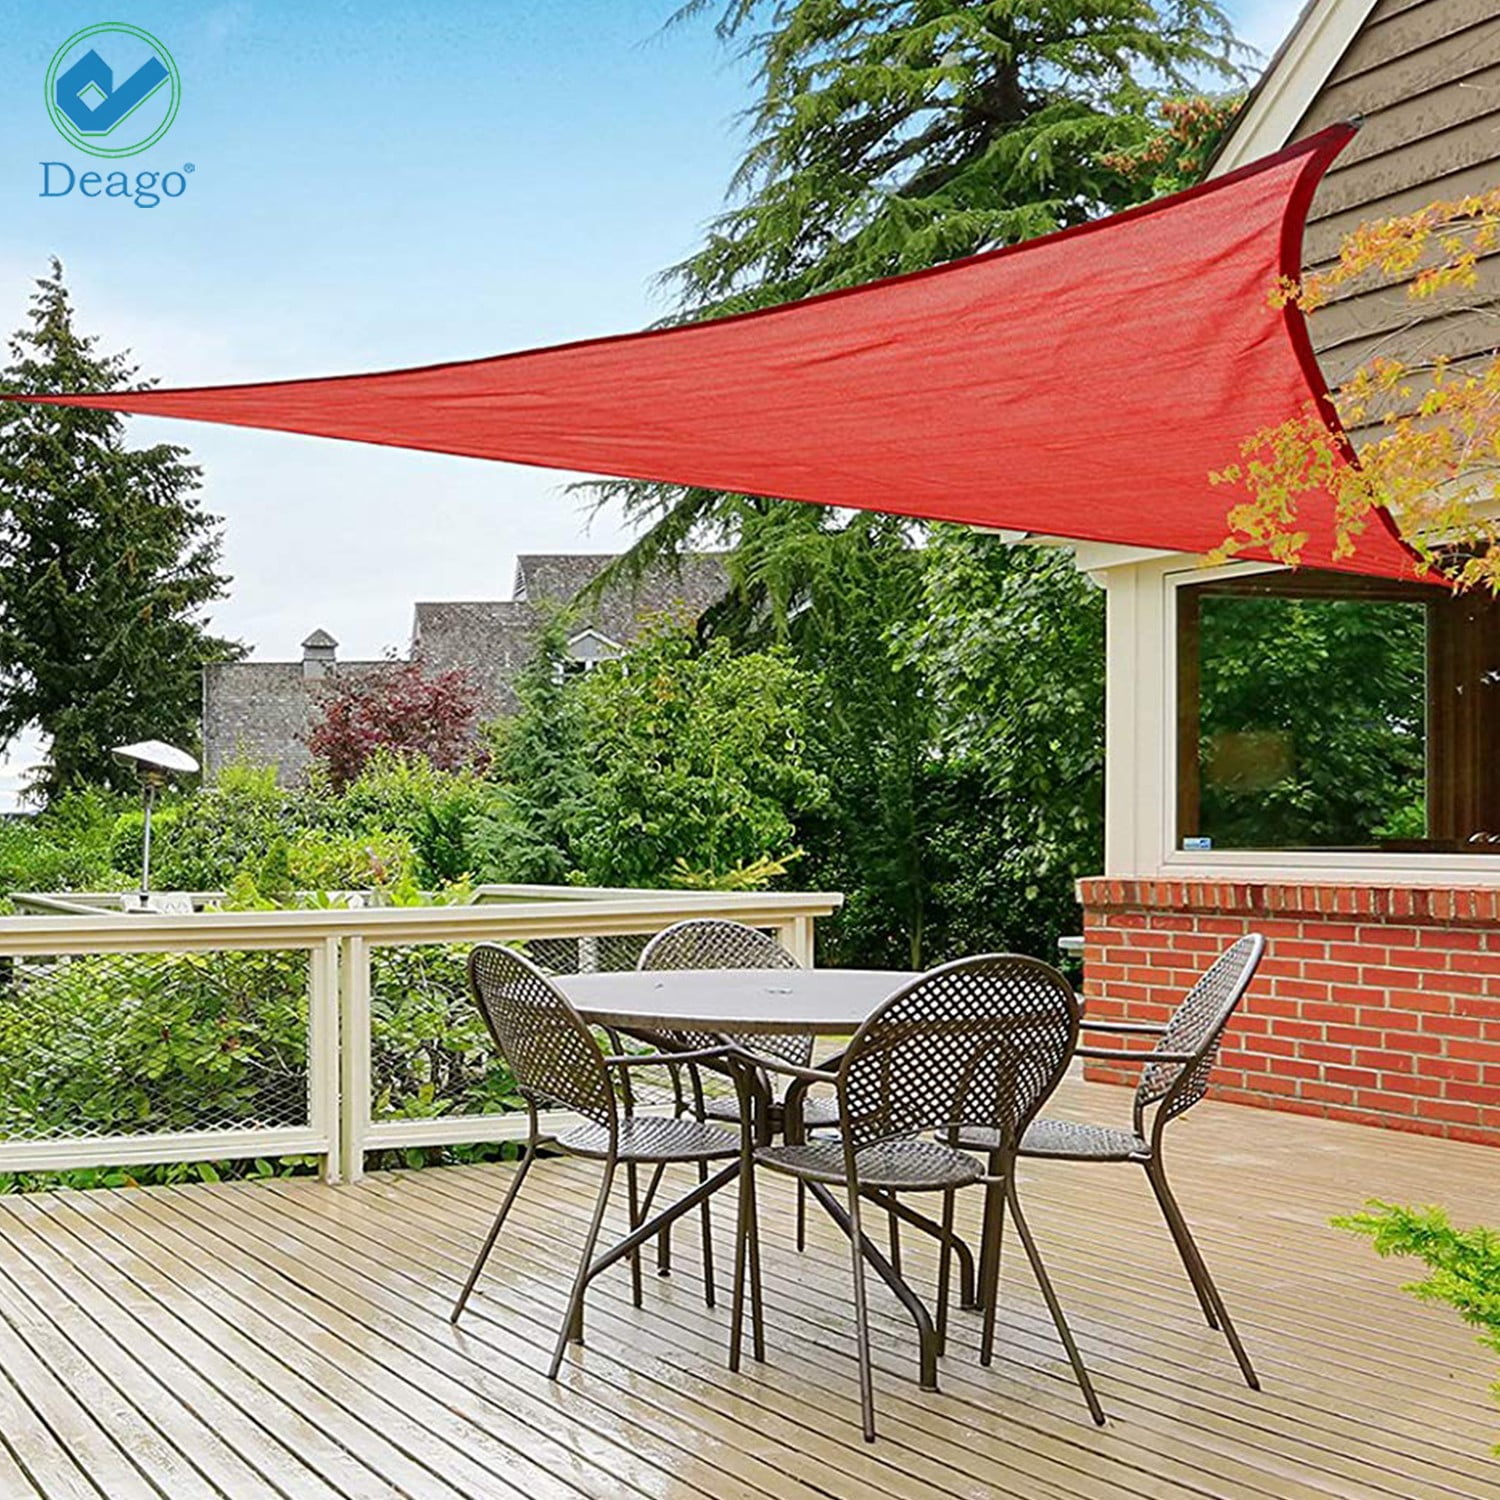 Waterproof Sun Shade Sail Canopy Perfect for Outdoor Patio Garden 95% UV Protection Square Red 10 ft x 10ft